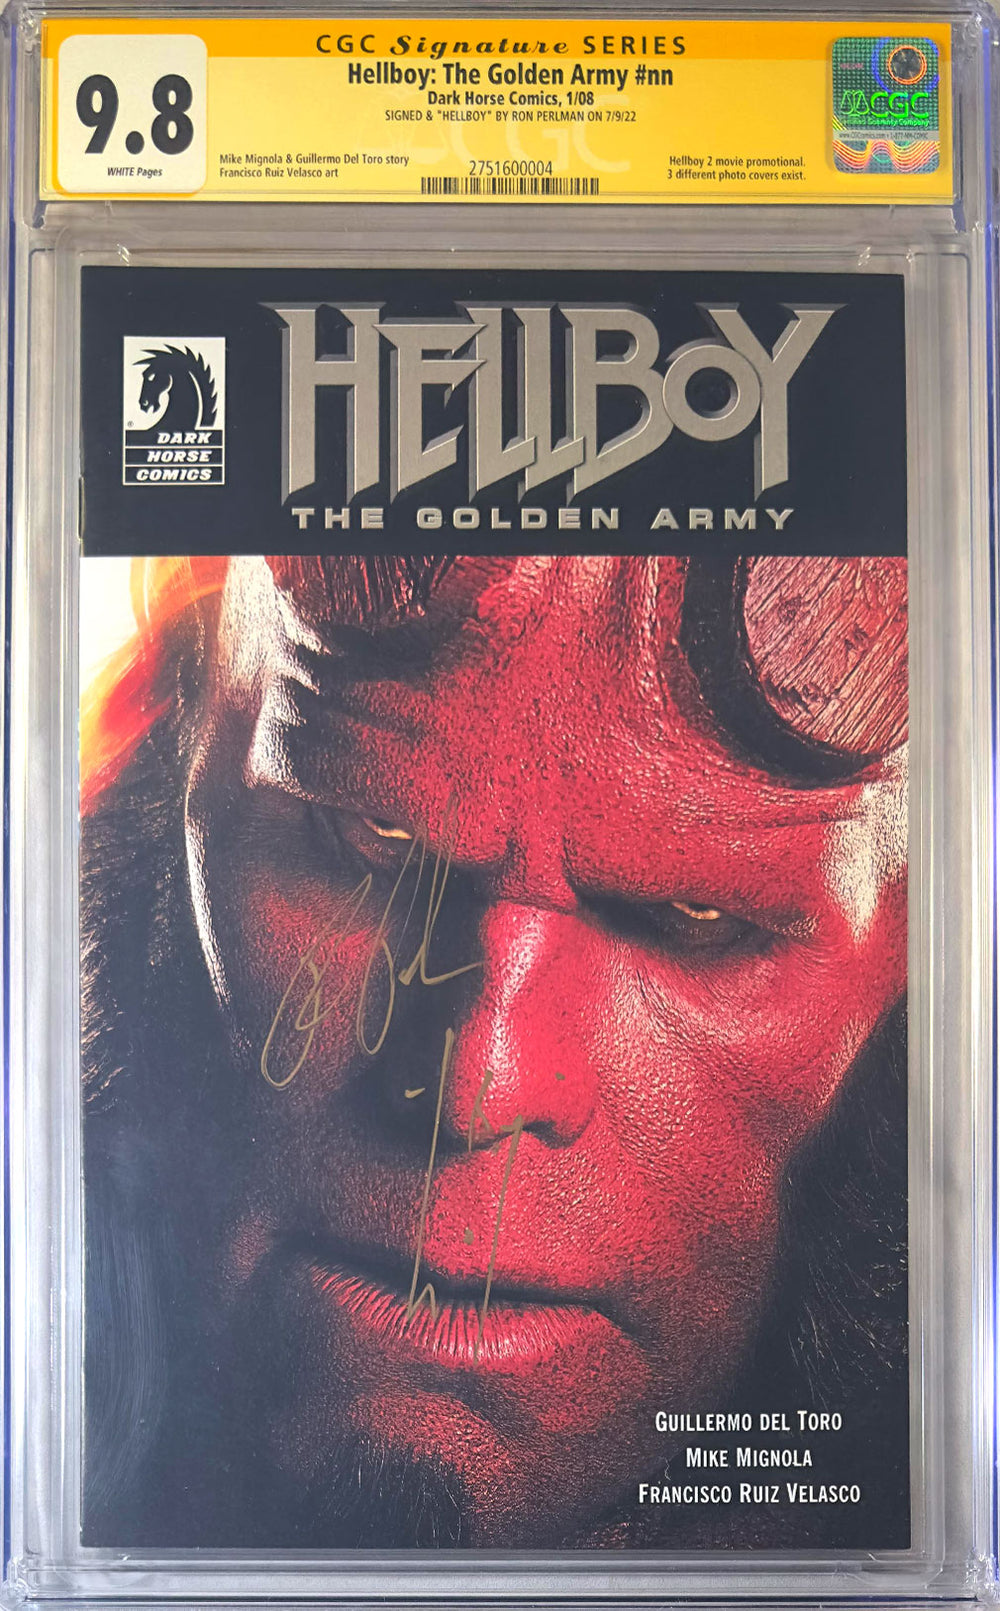 Hellboy: The Golden Army #nn CGC SS 9.8 Signed by Ron Perlman